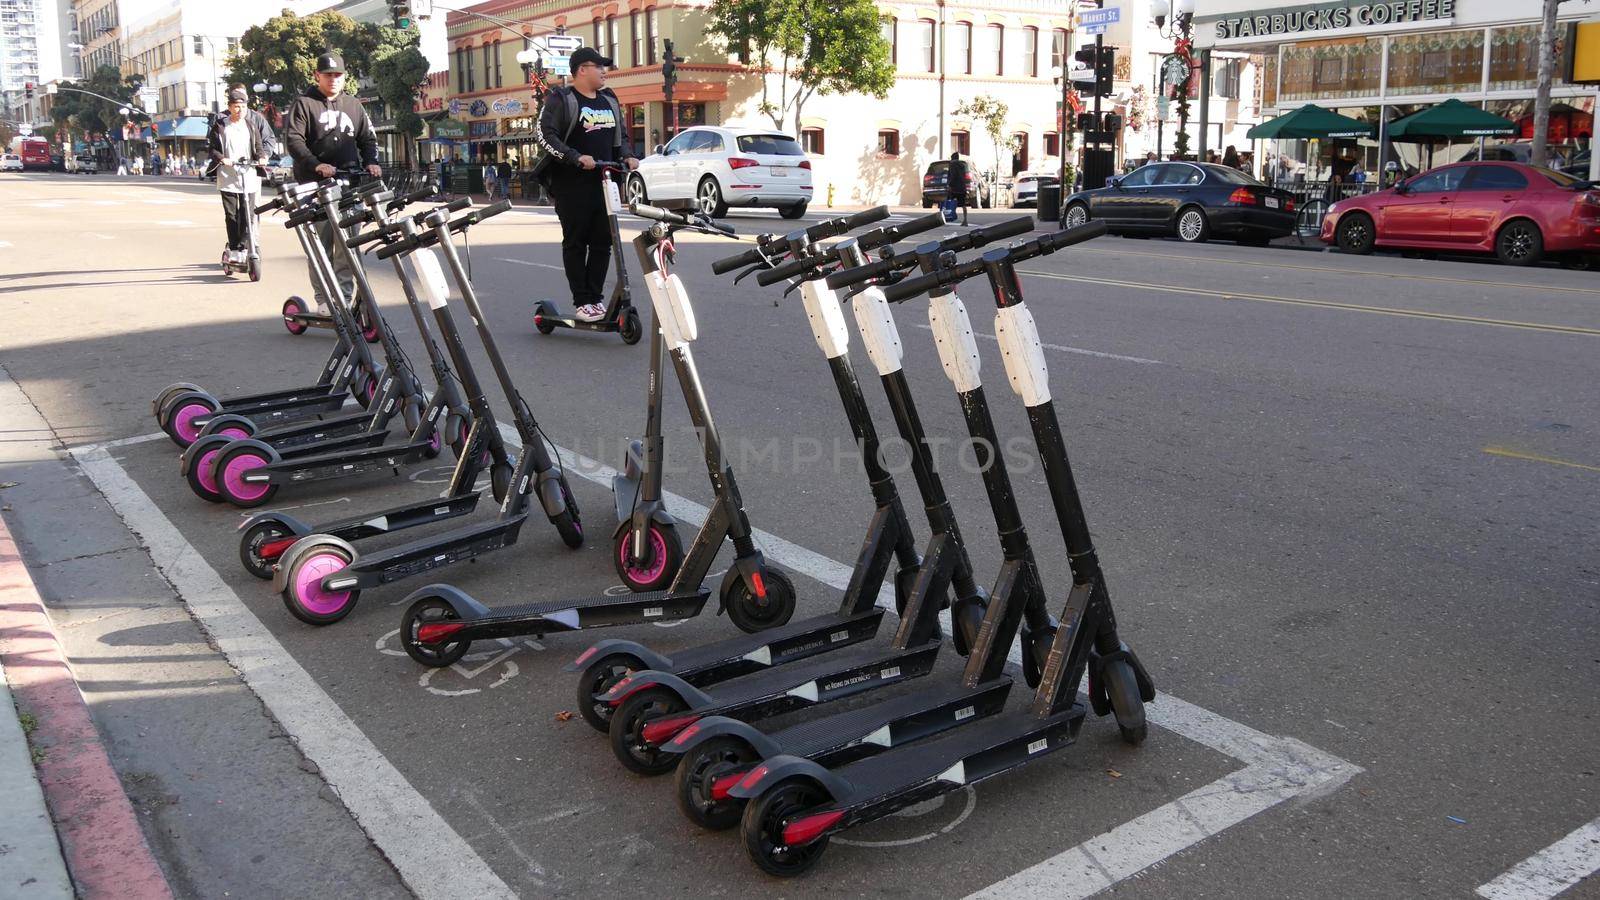 SAN DIEGO, CALIFORNIA USA - 4 JAN 2020: Row of ride sharing electric scooters parked on street in Gaslamp Quarter. Rental dockless public bikes, eco transport in city. Rent kick cycle with mobile app.